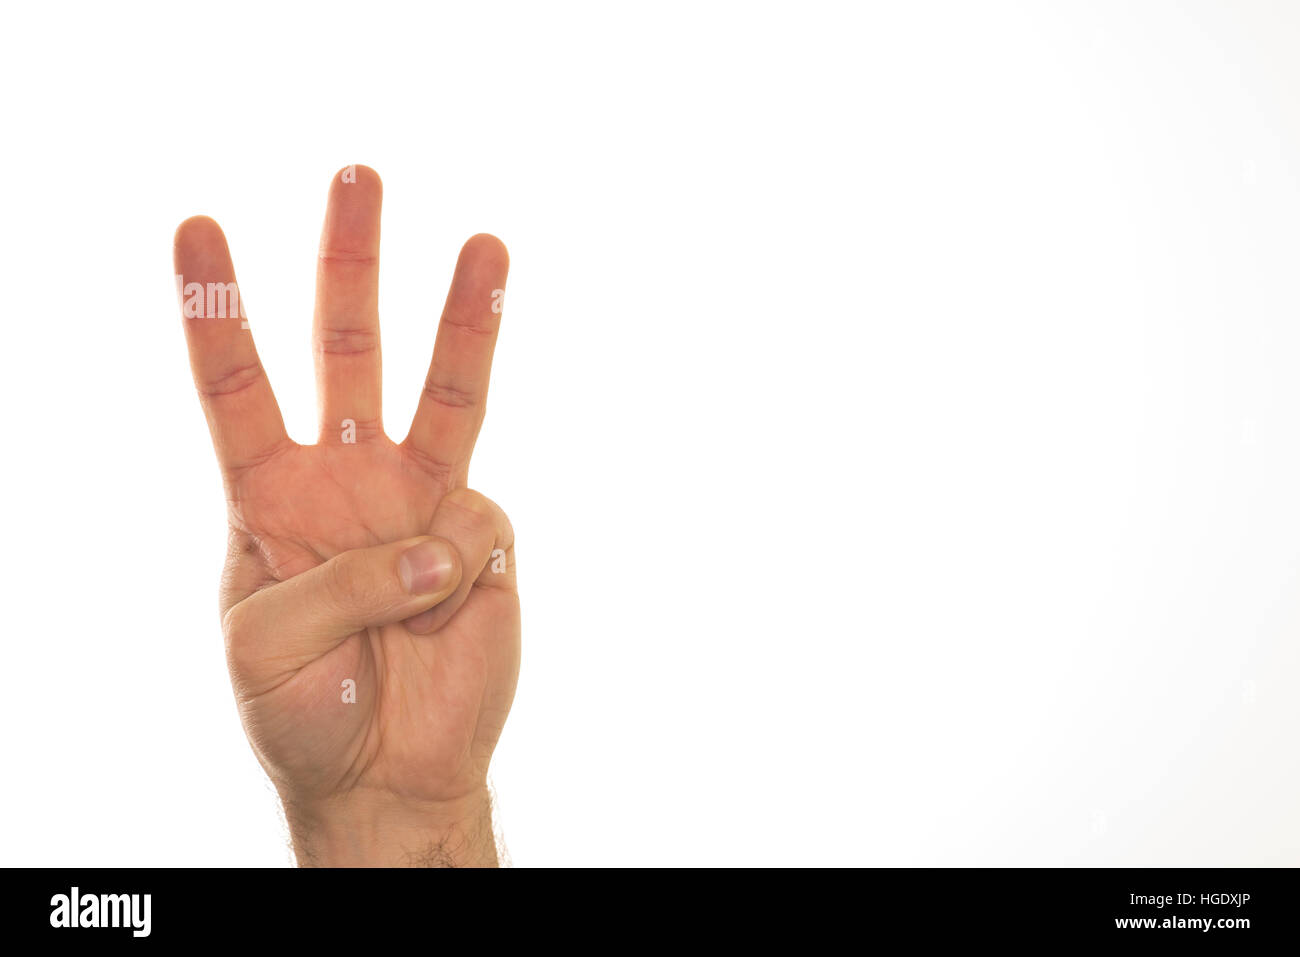 Hand showing three fingersfor counting and indicating numbers. Stock Photo